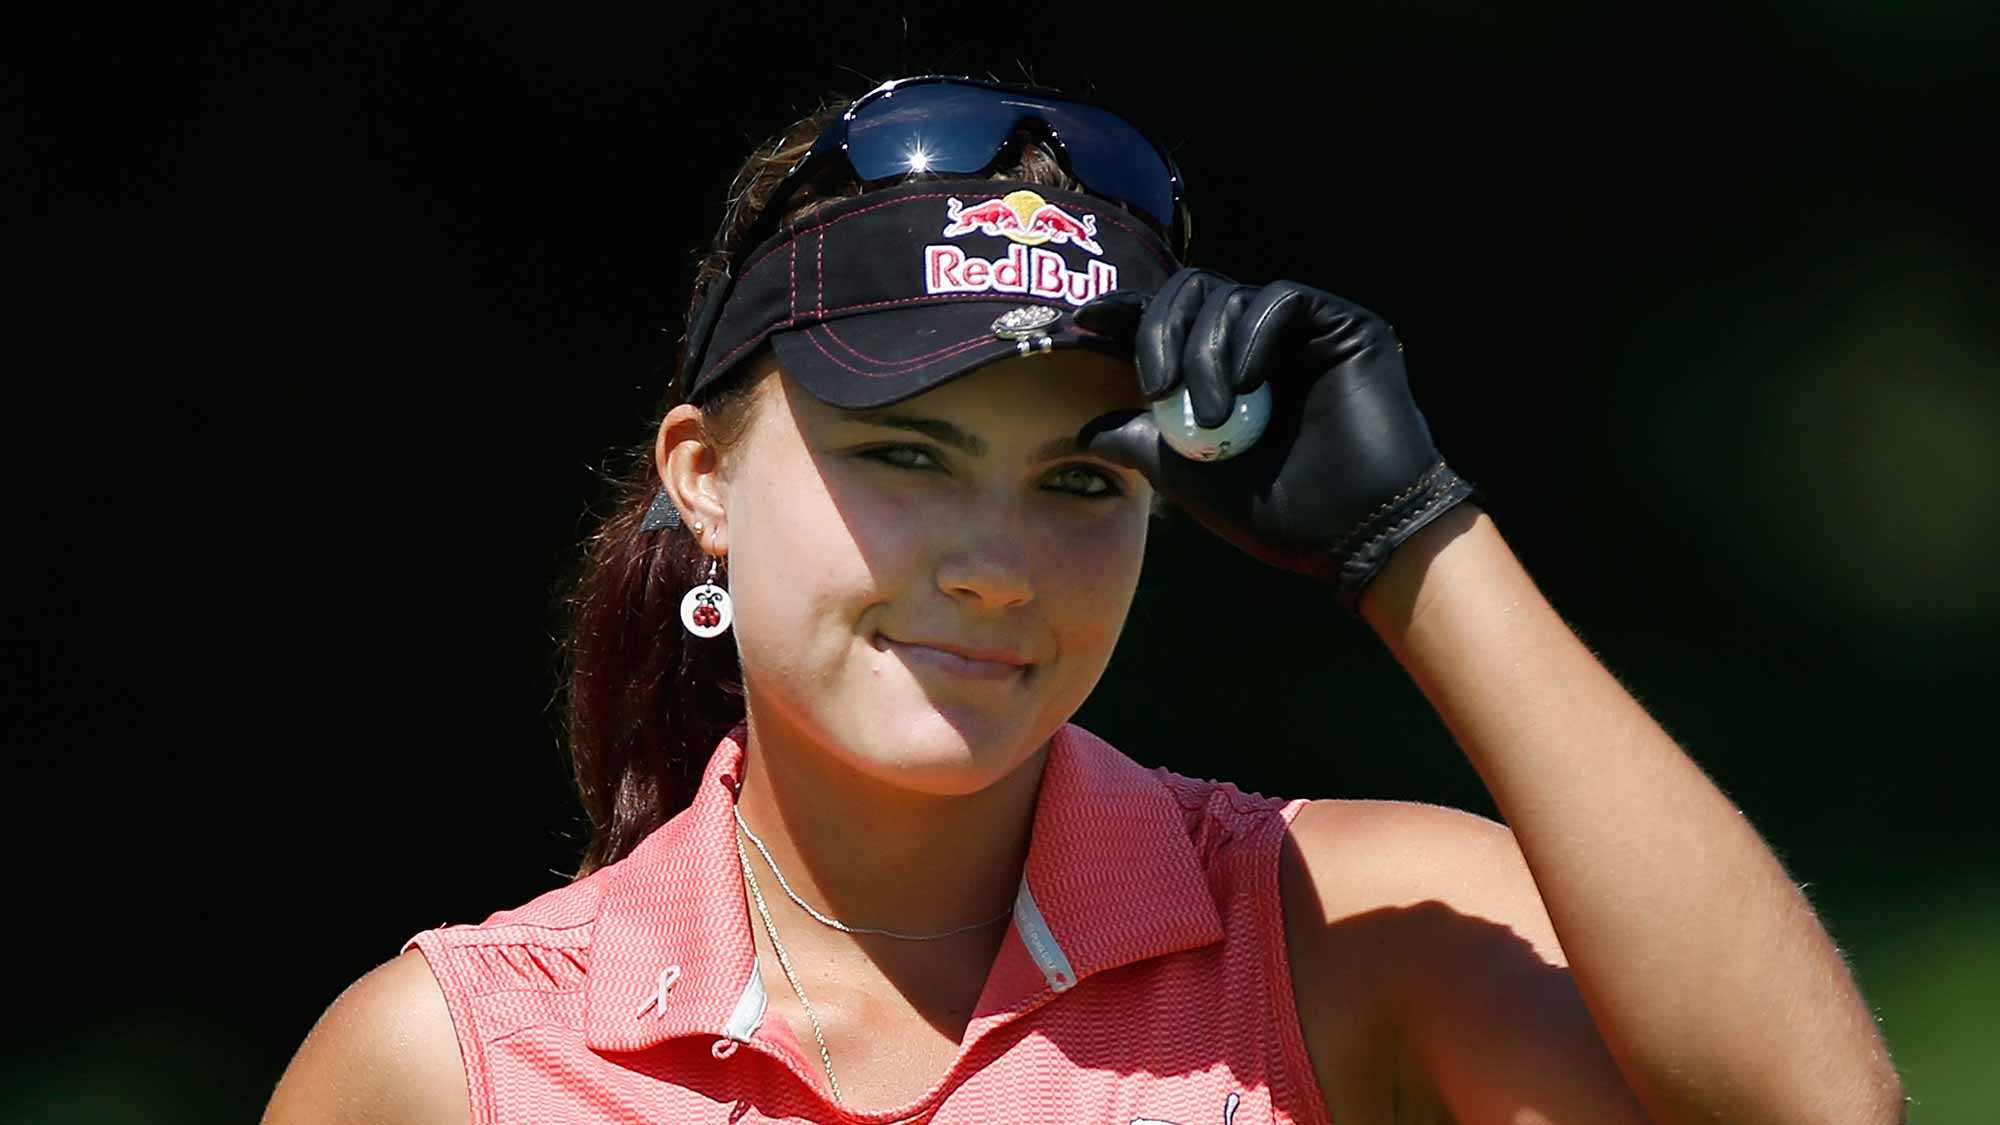 Lexi Thompson Cards Low Round of the Year to Take Lead at Meijer LPGA Class...